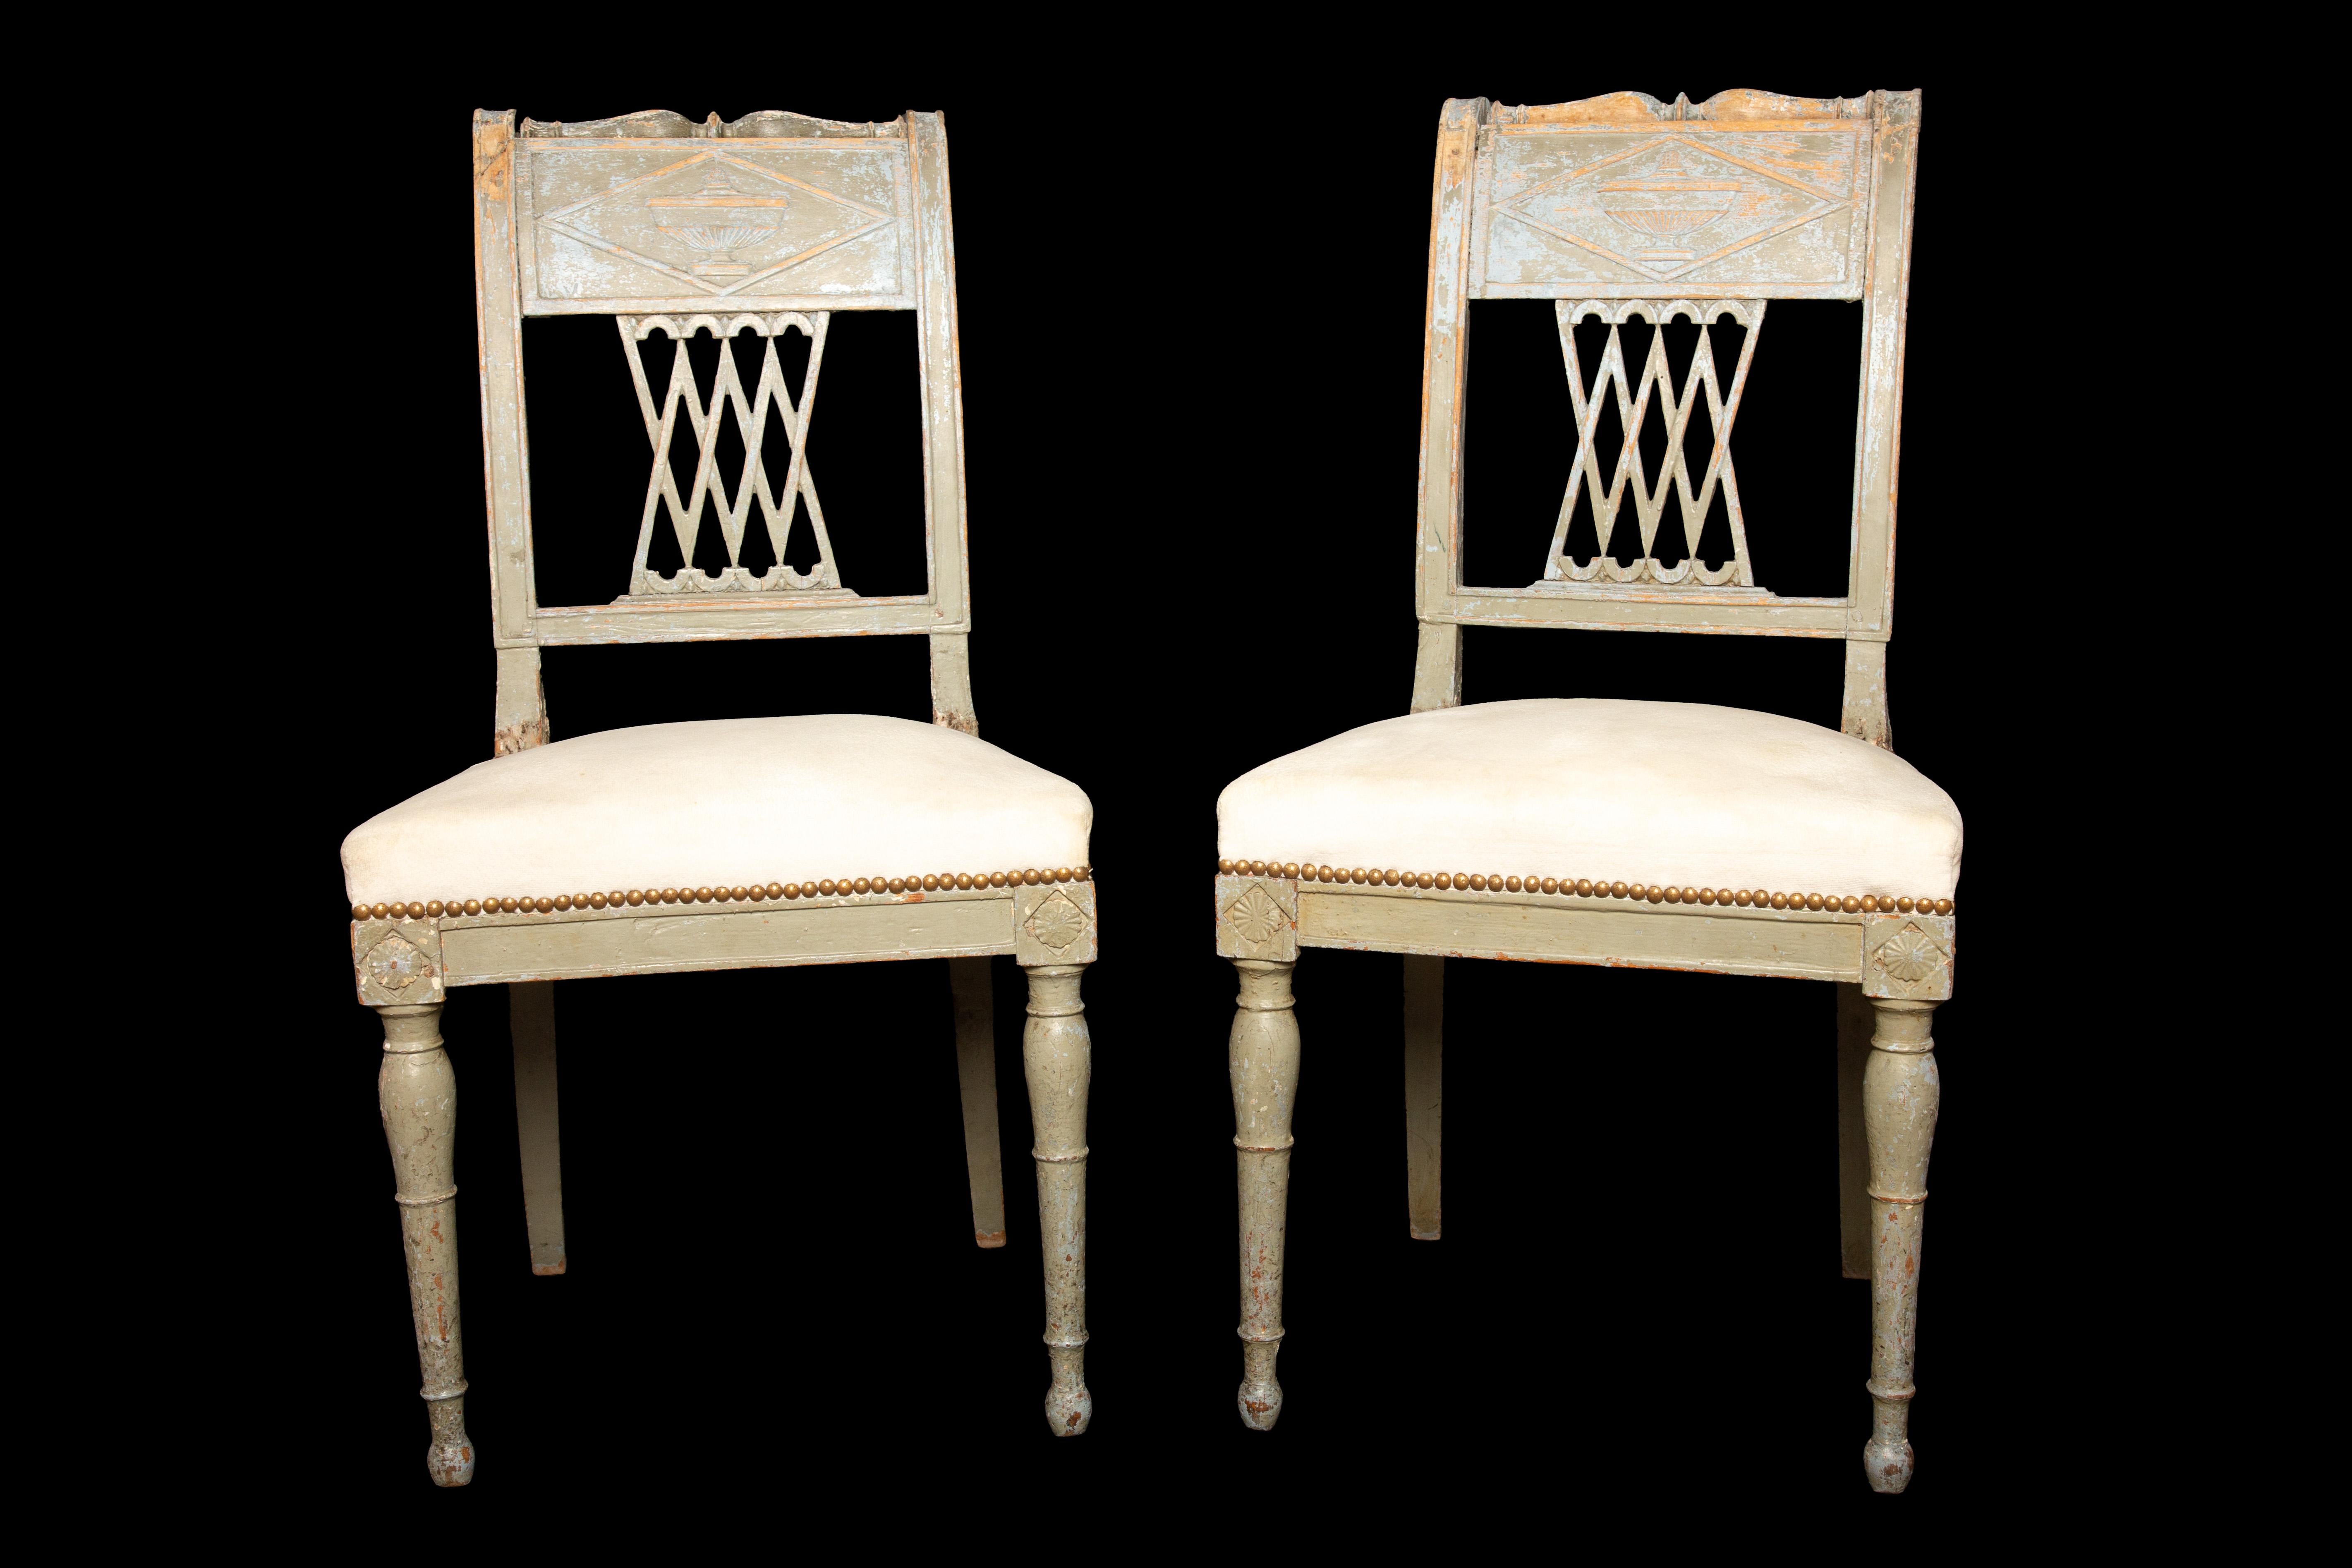 This exquisite pair of painted beechwood chairs showcases the elegance and artistry of the Directoire period (1795-1799). The chairs feature a captivating openwork back adorned with intricate crosses and delicate vase motifs, displaying the skilled